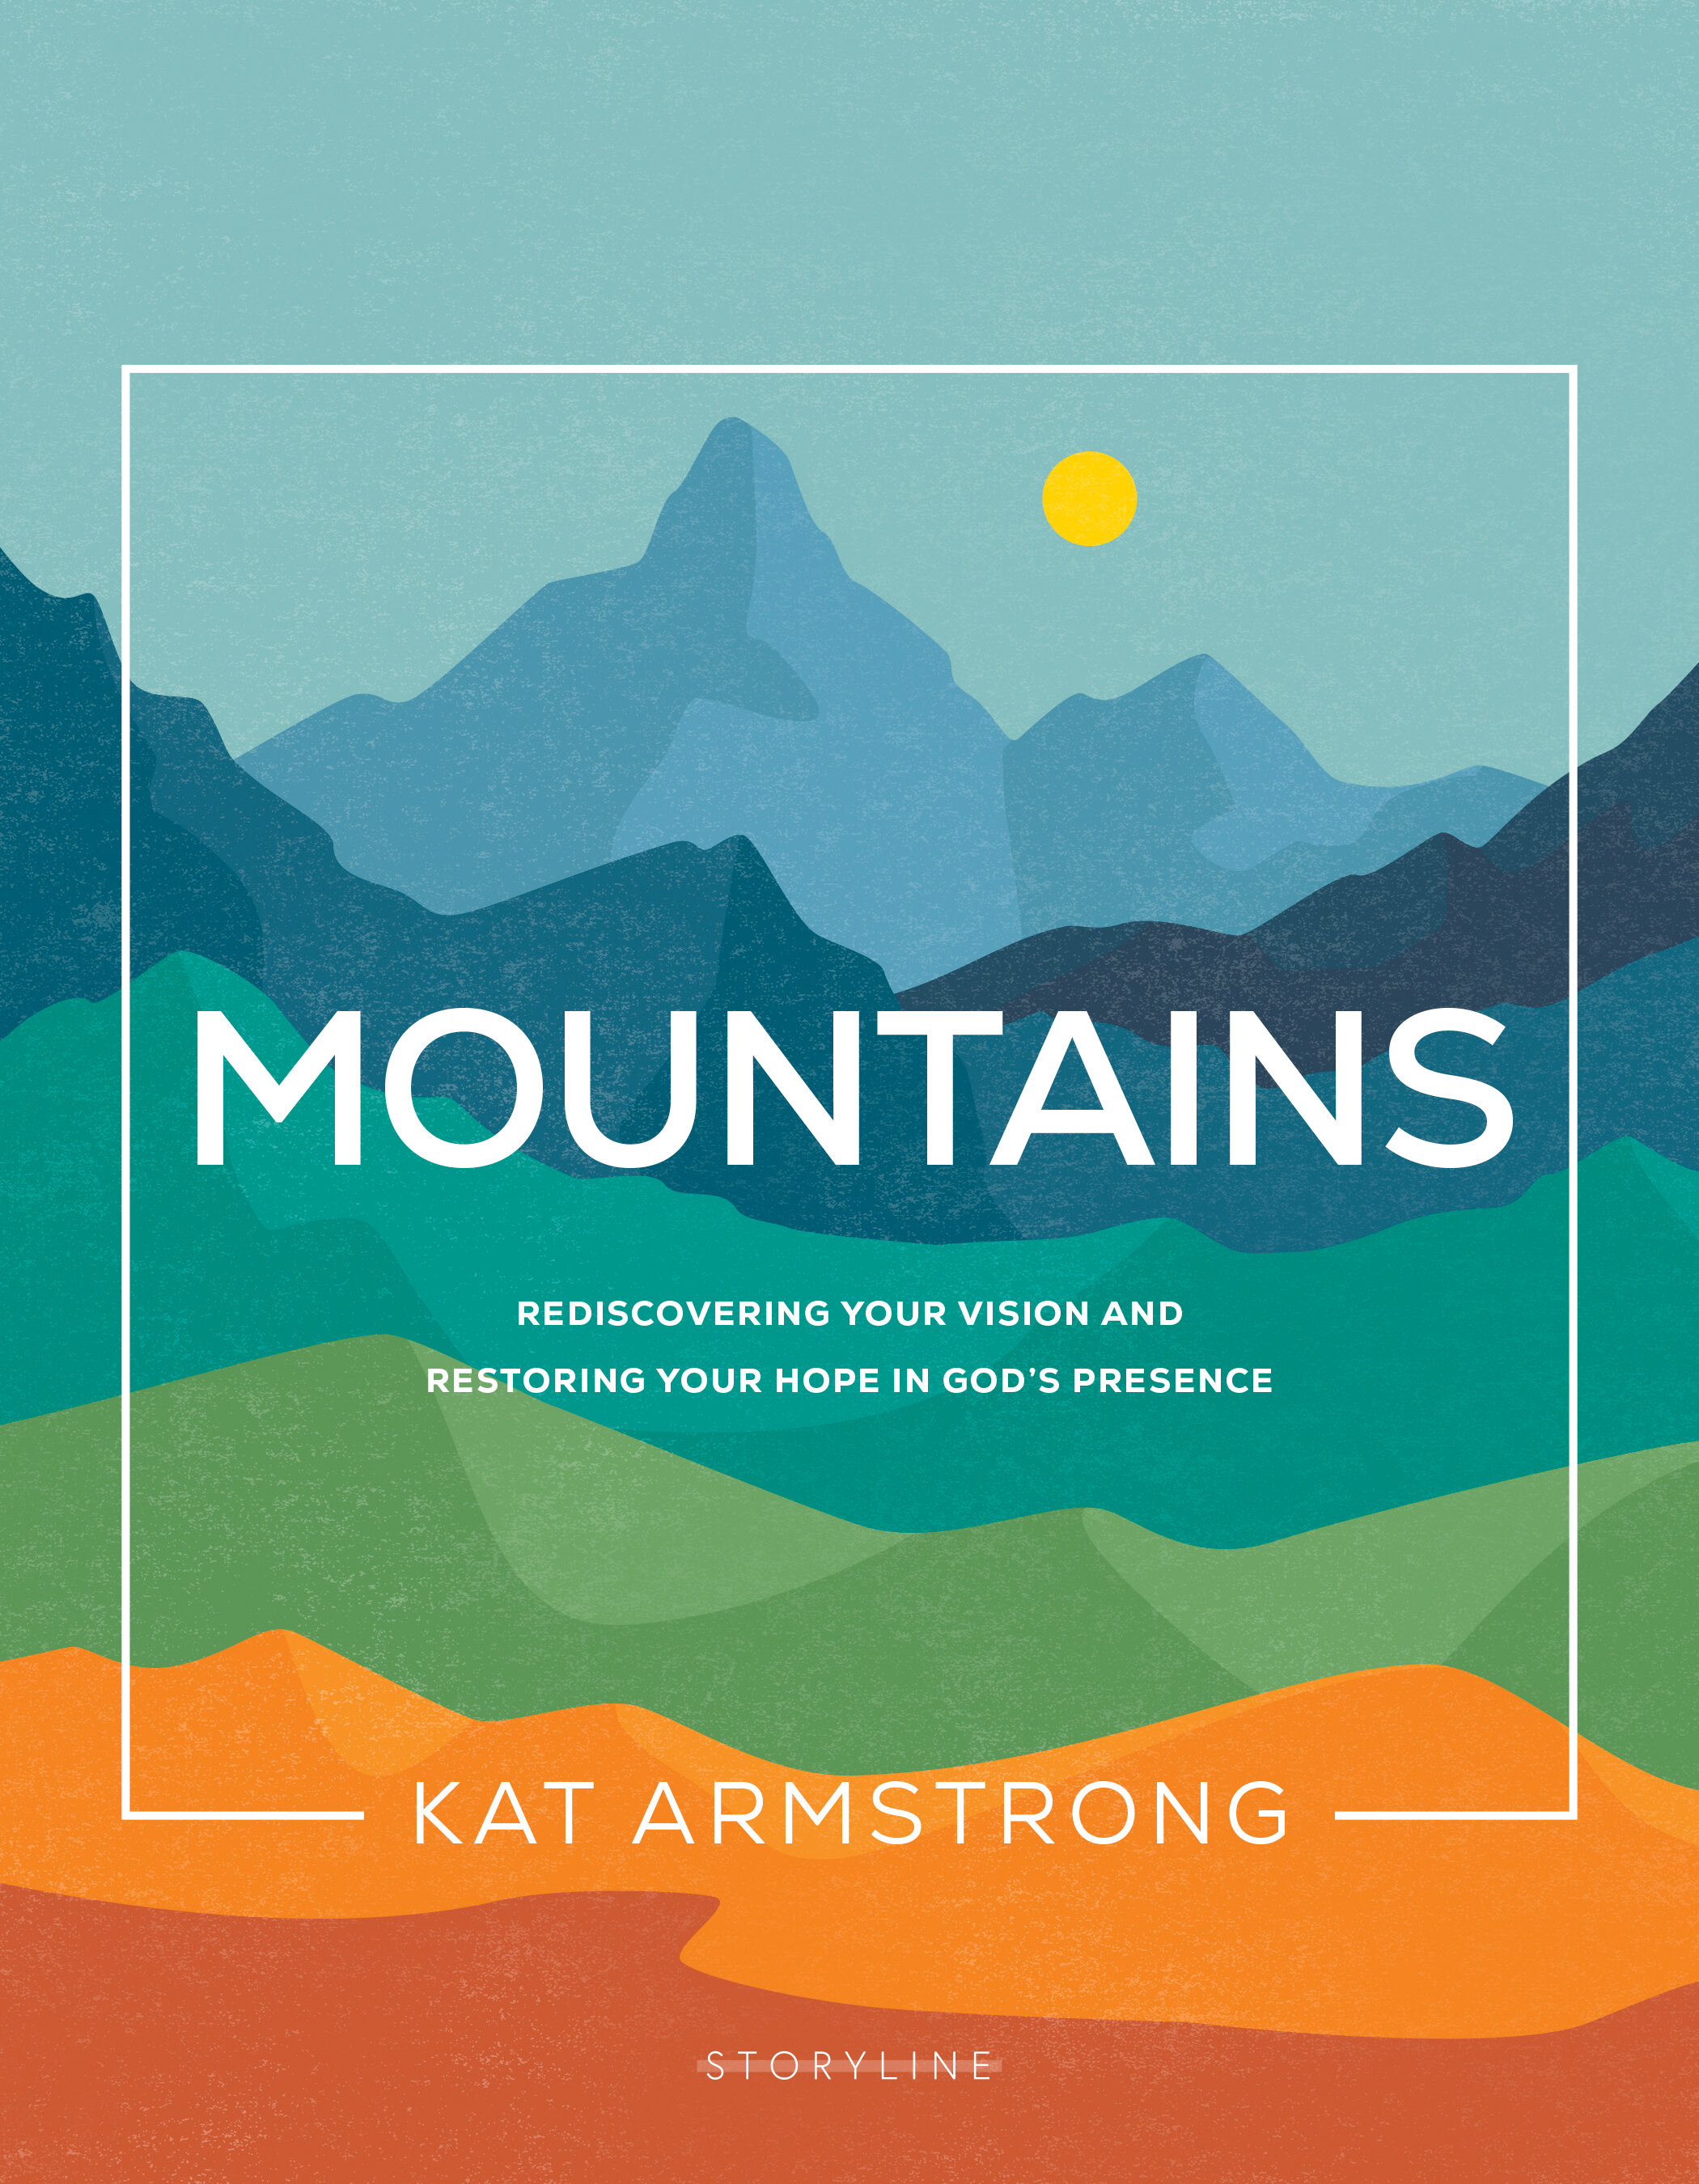 Mountains: Rediscovering Your Vision and Restoring Your Hope in God's Presence